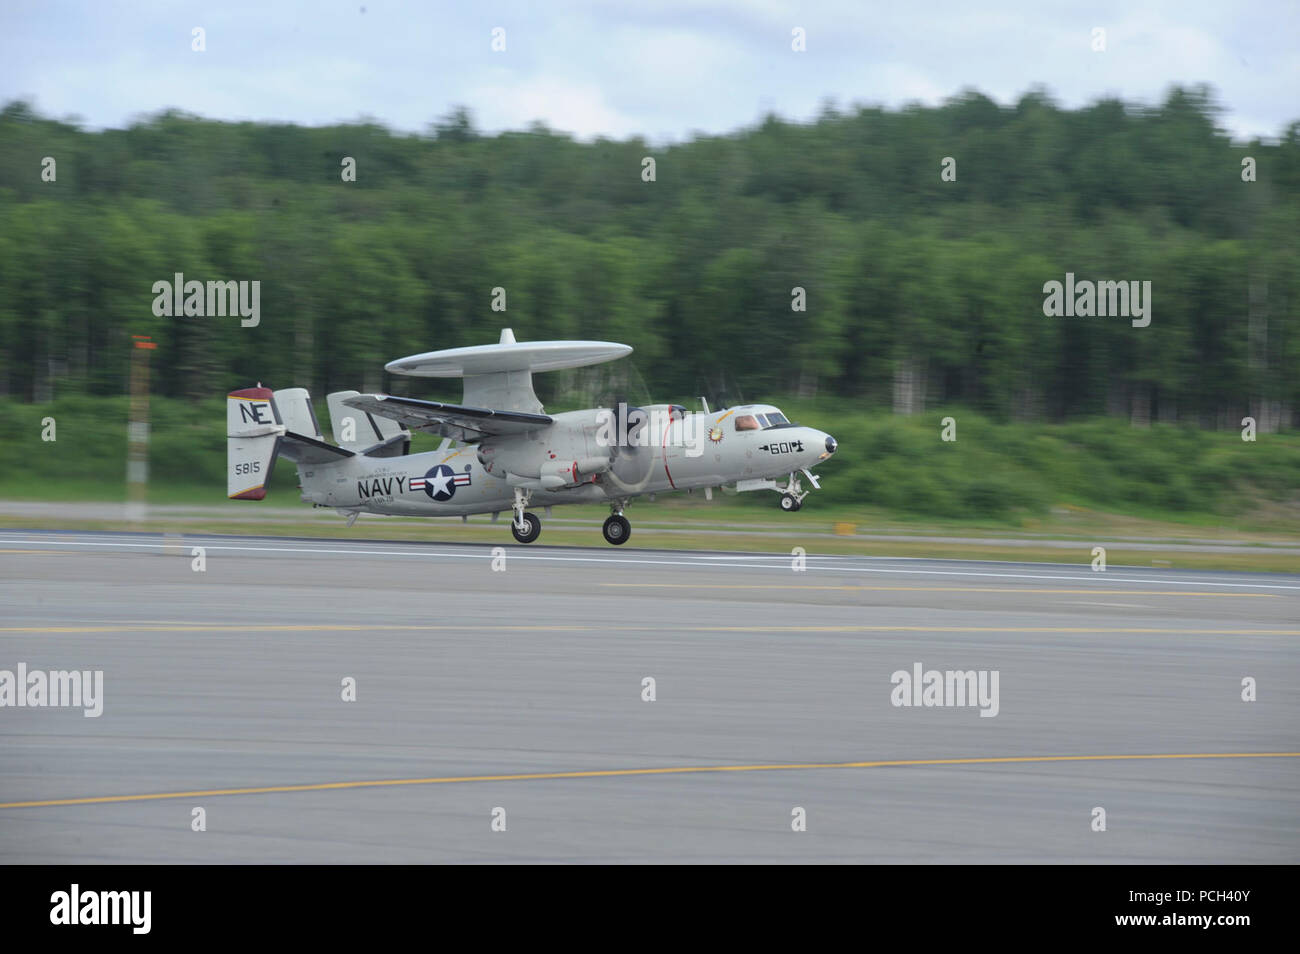 A U.S. Navy E-2C Hawkeye aircraft takes off to participate in the first training mission of Operation Northern Edge 11 at Joint Base Elemndorf-Richardson, Alaska, June 13, 2011. Northern Edge, Alaska's largest military training exercise, was designed to prepare joint forces to respond to crises throughout the Asia-Pacific region. Stock Photo